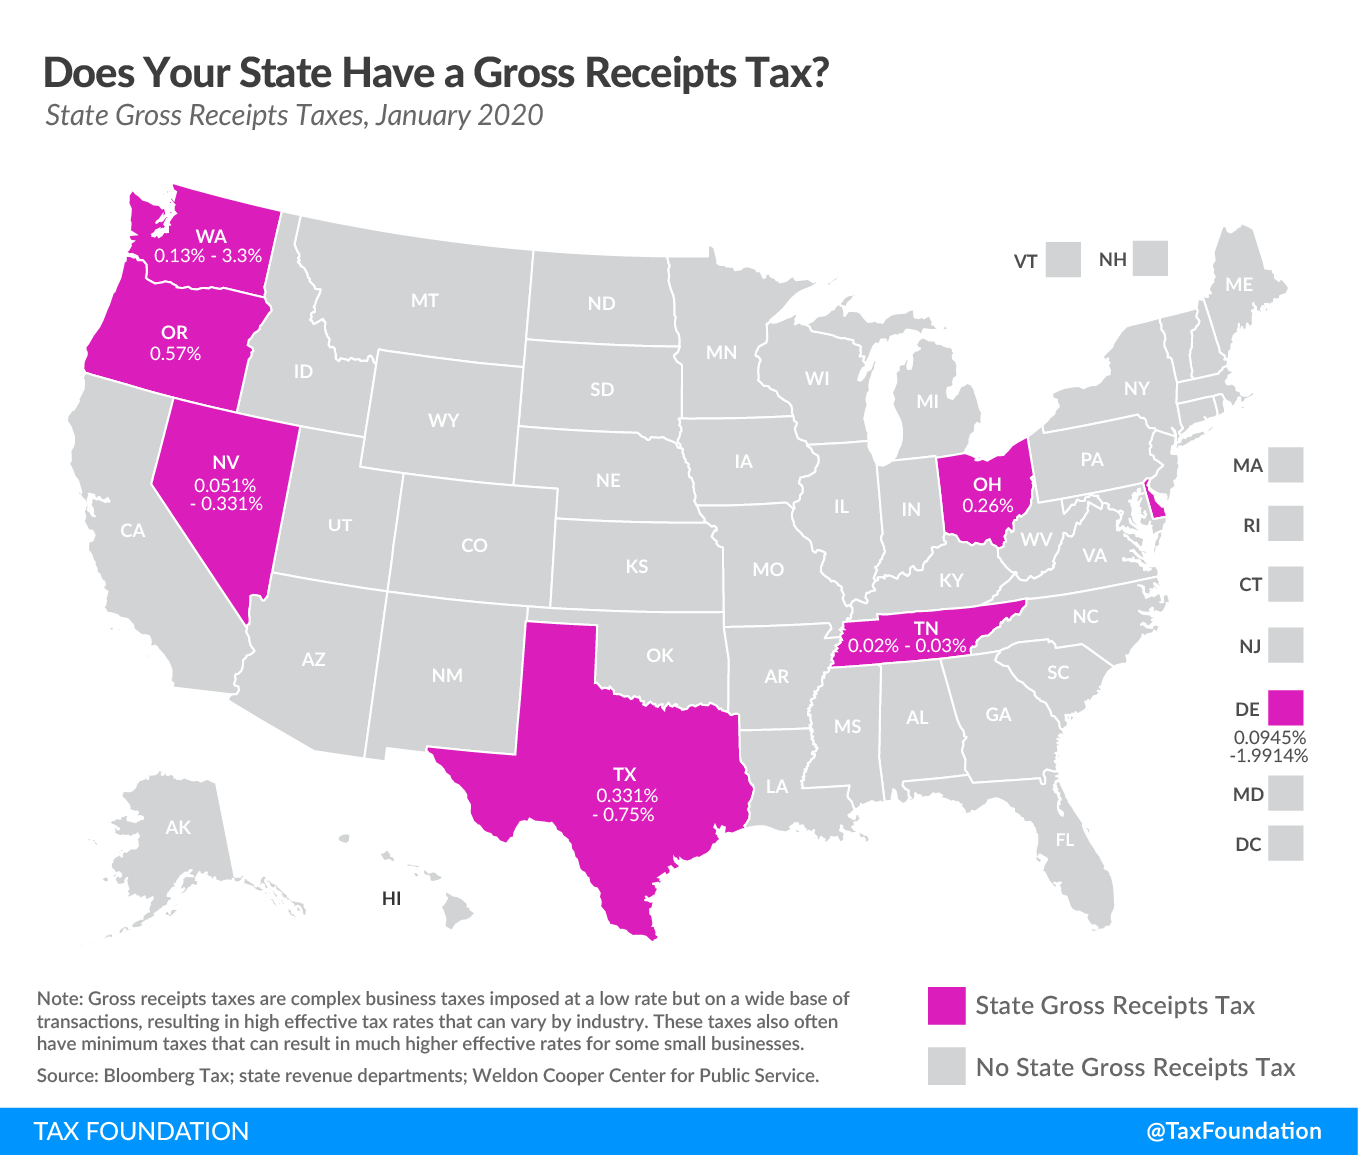 Which states have a gross receipts tax? State gross receipts tax, state gross receipts tax, Washington state gross receipts tax, Washington gross receipts tax, Oregon gross receipts tax, Nevada gross receipts tax, Texas gross receipts tax, Tennessee gross receipts tax, Ohio gross receipts tax, Delaware gross receipts tax, does your state have a gross receipts tax?